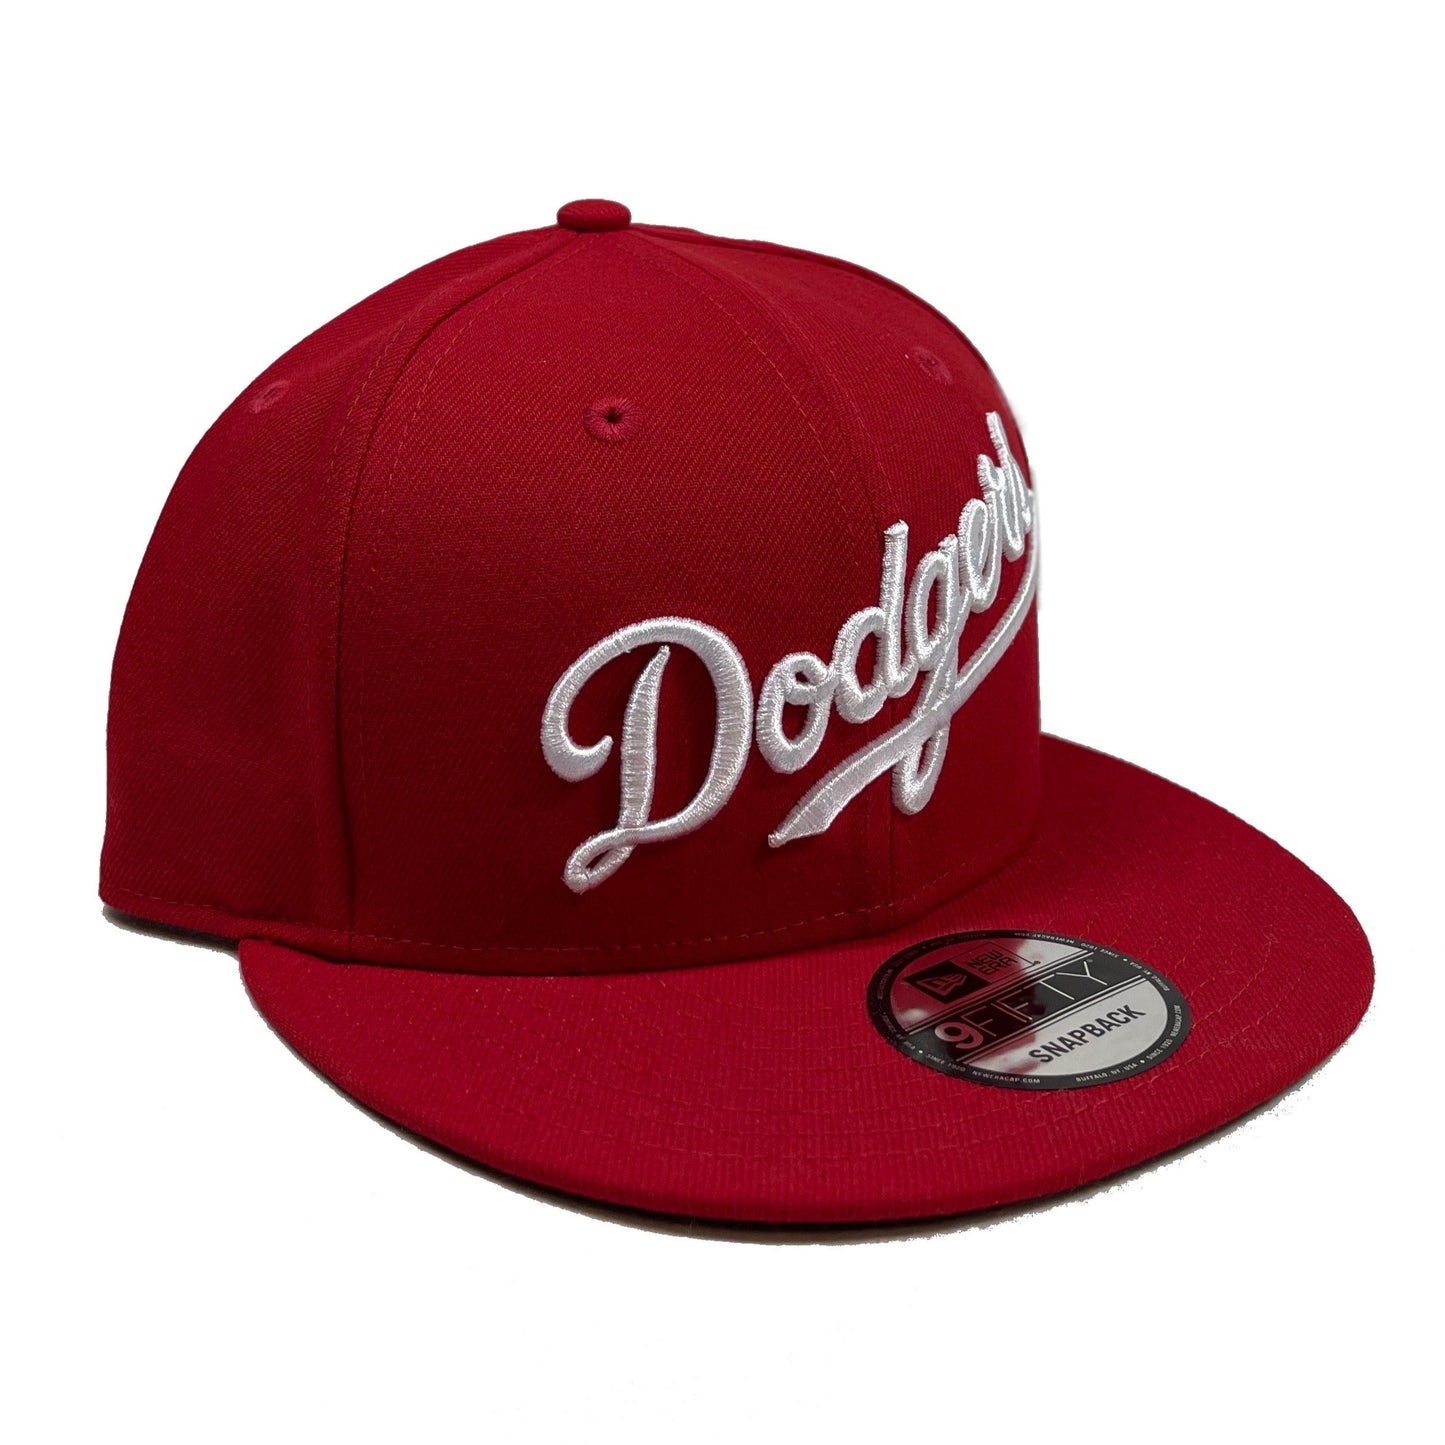 Los Angeles Dodgers (Red) Snapback/Fitted